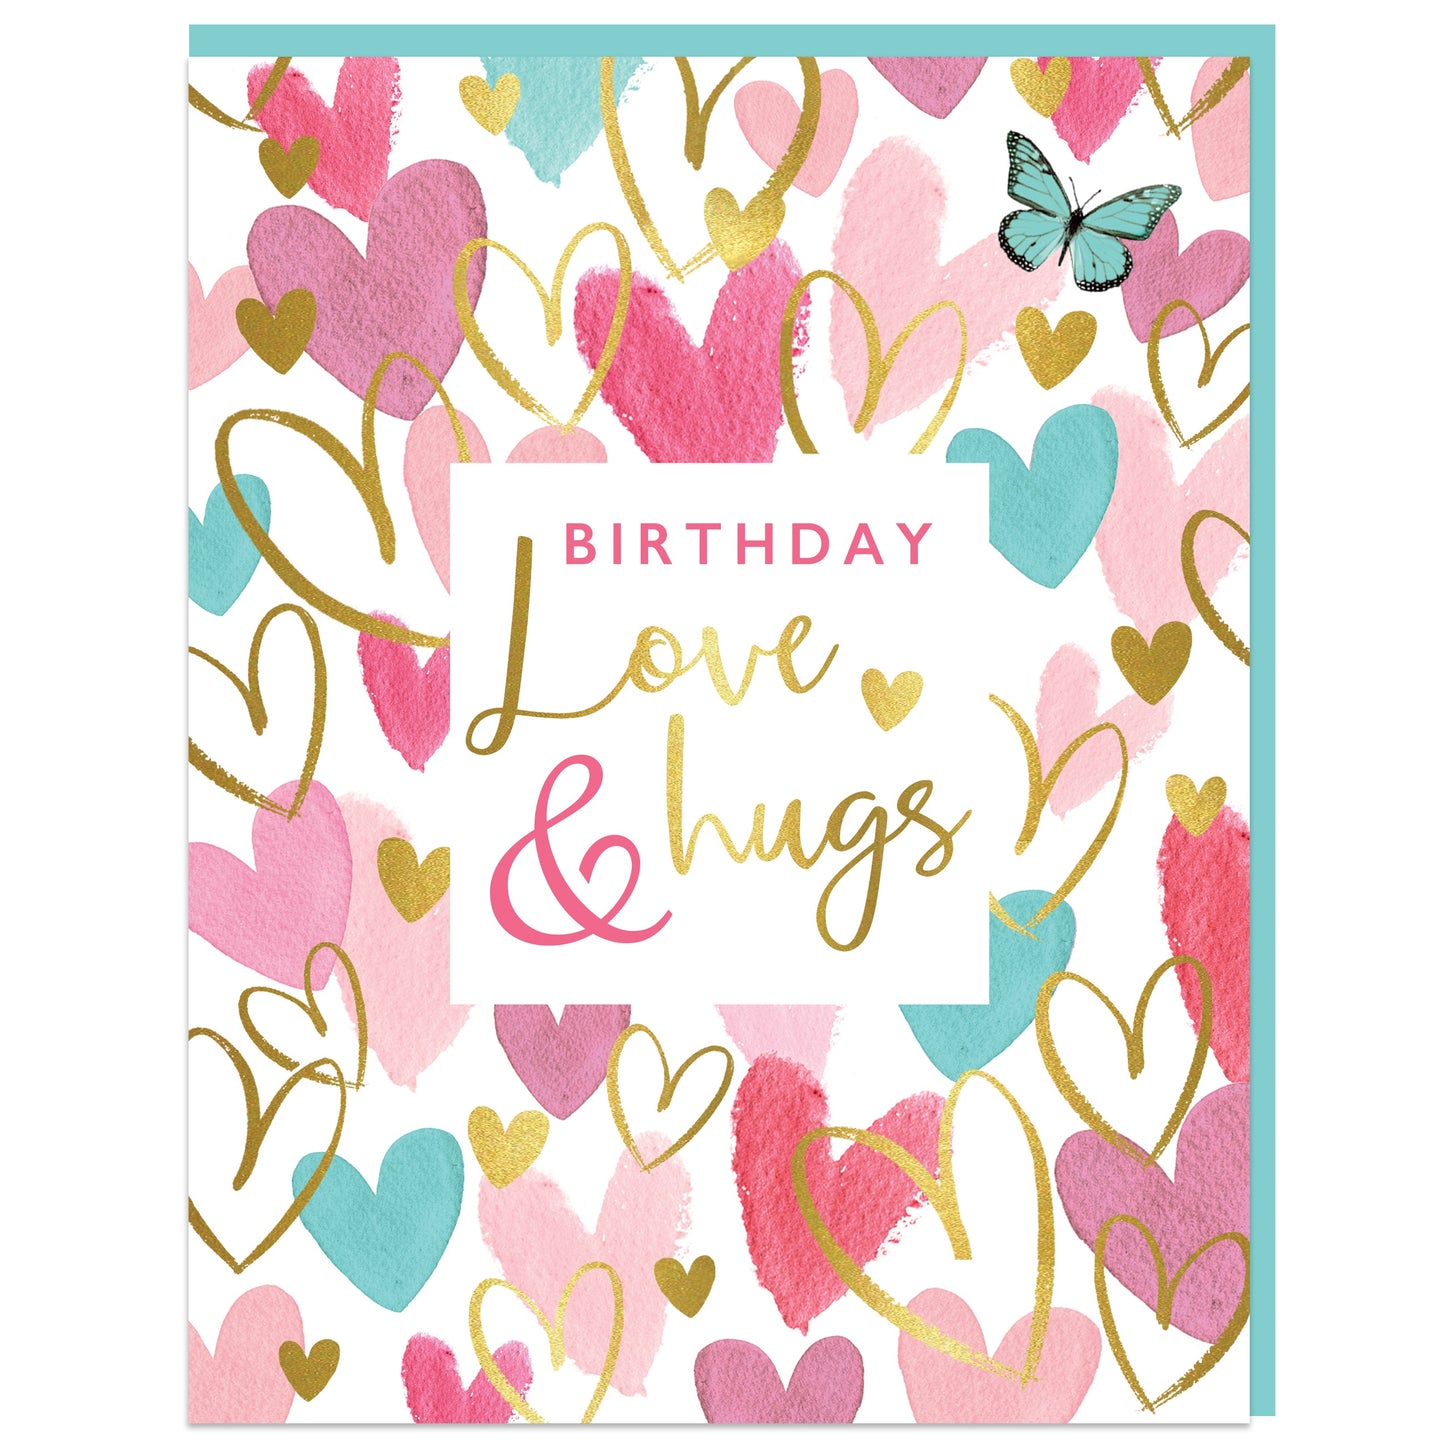 Pop Out Birthday Love & Hugs For You Card Just WOW!